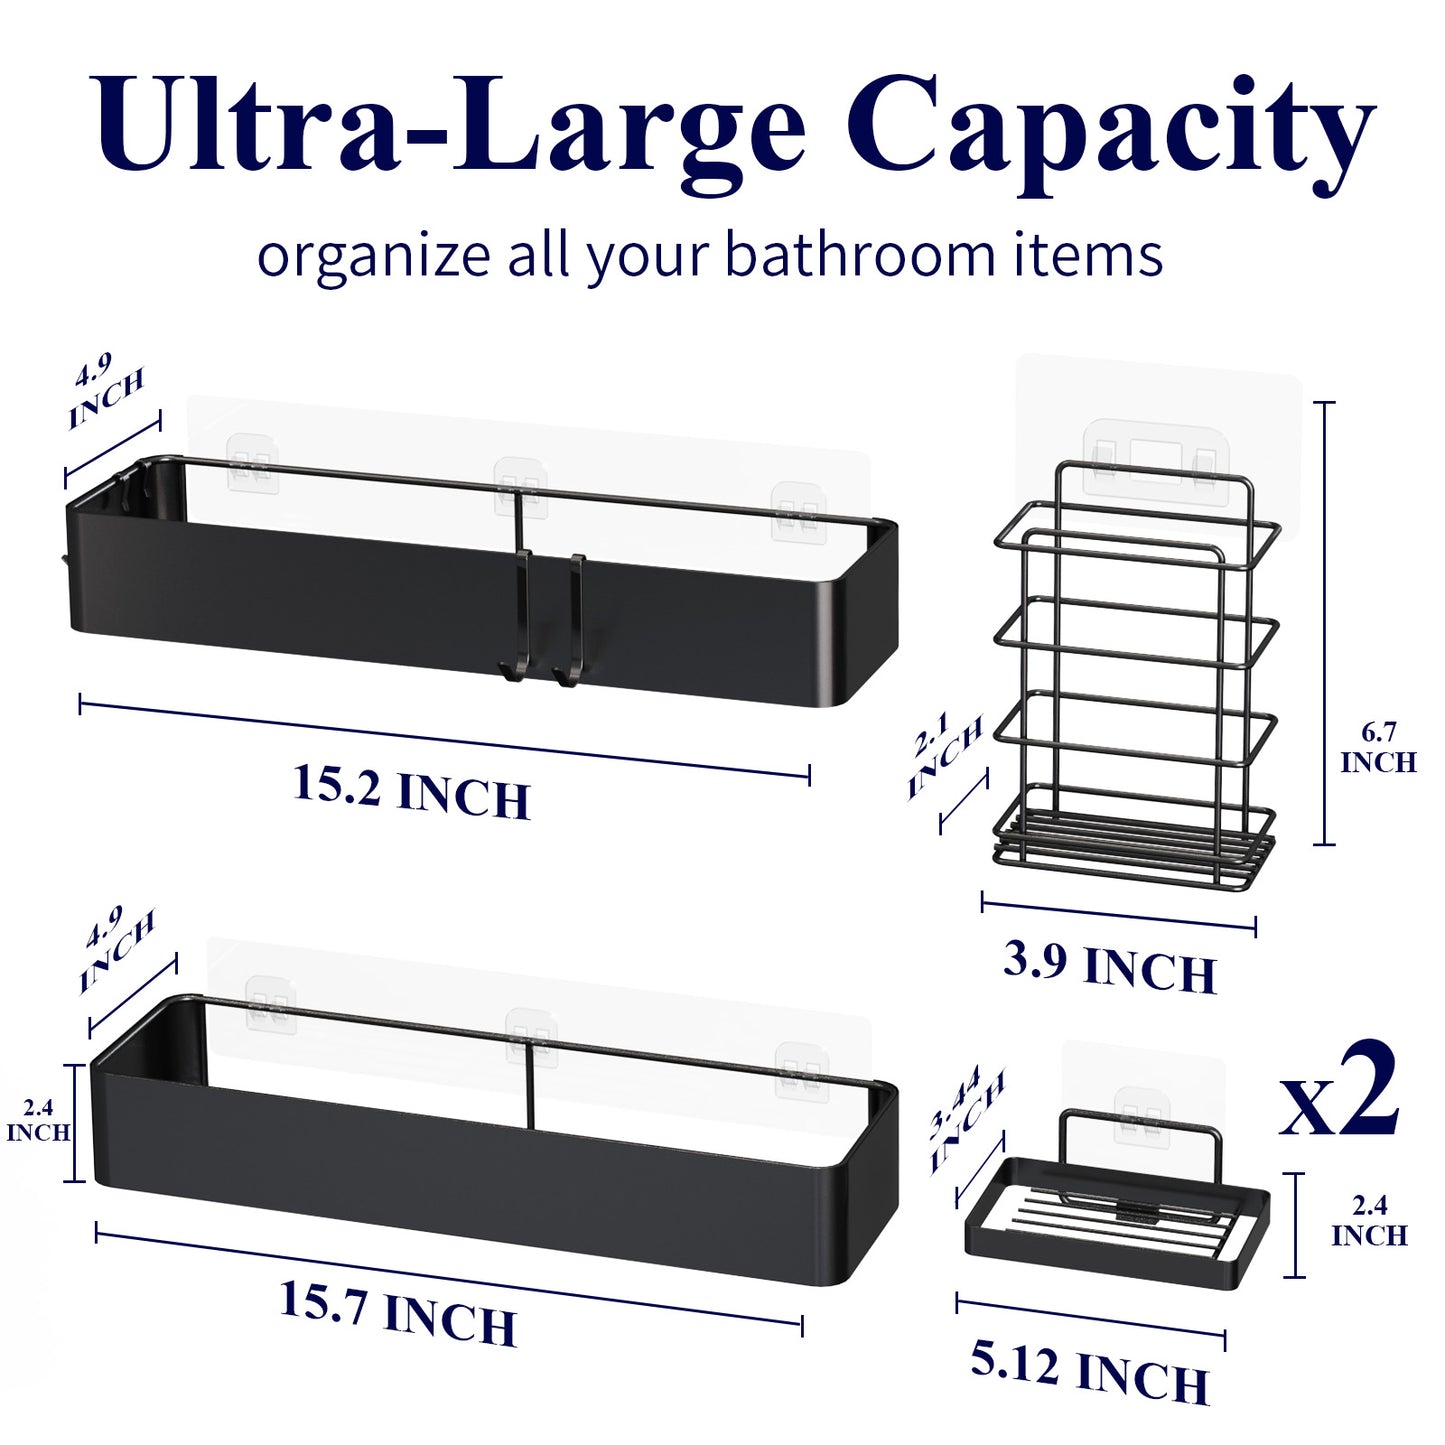 Shower Caddy Adhesive Bathroom Shelf Wall Mounted, in Black, 3 Pack